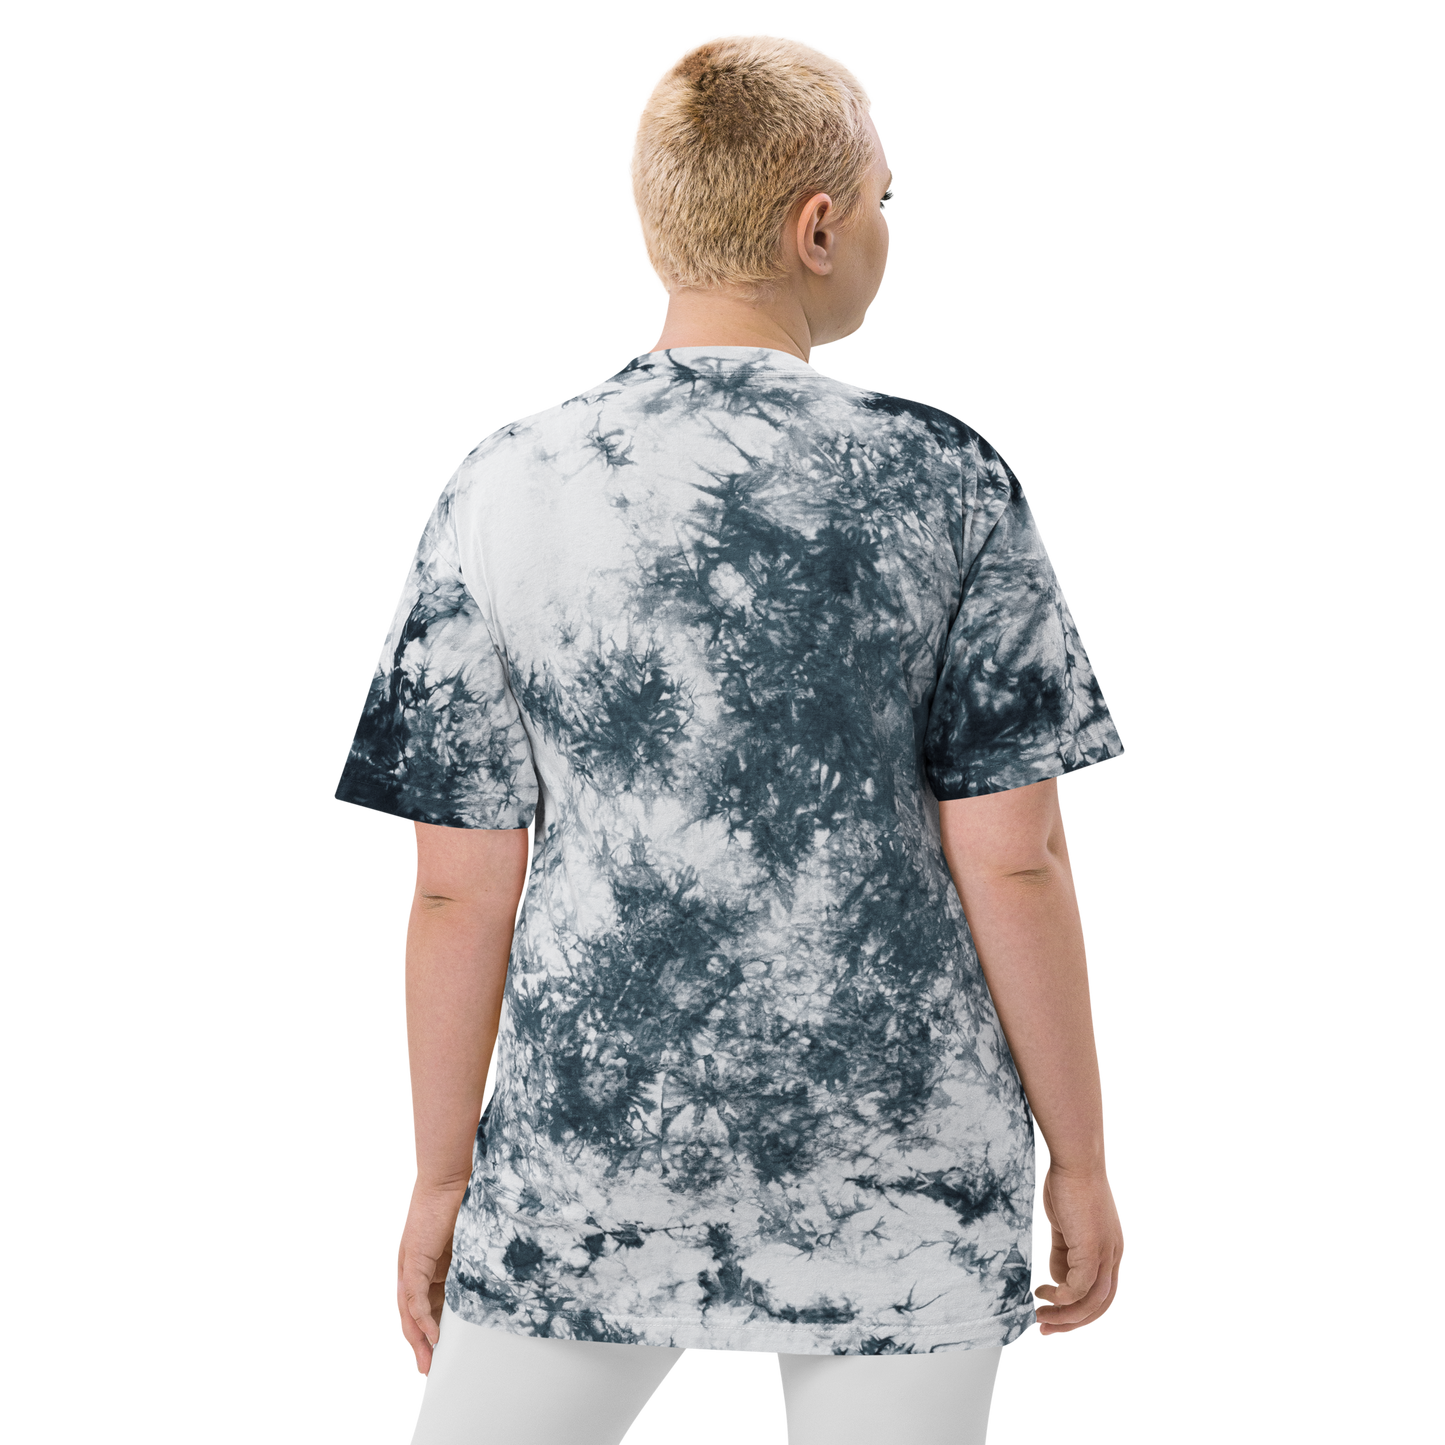 YHM Designs - YXY Whitehorse Oversized Tie-Dye T-Shirt - Crossed-X Design with Airport Code and Vintage Propliner - White Embroidery - Image 17